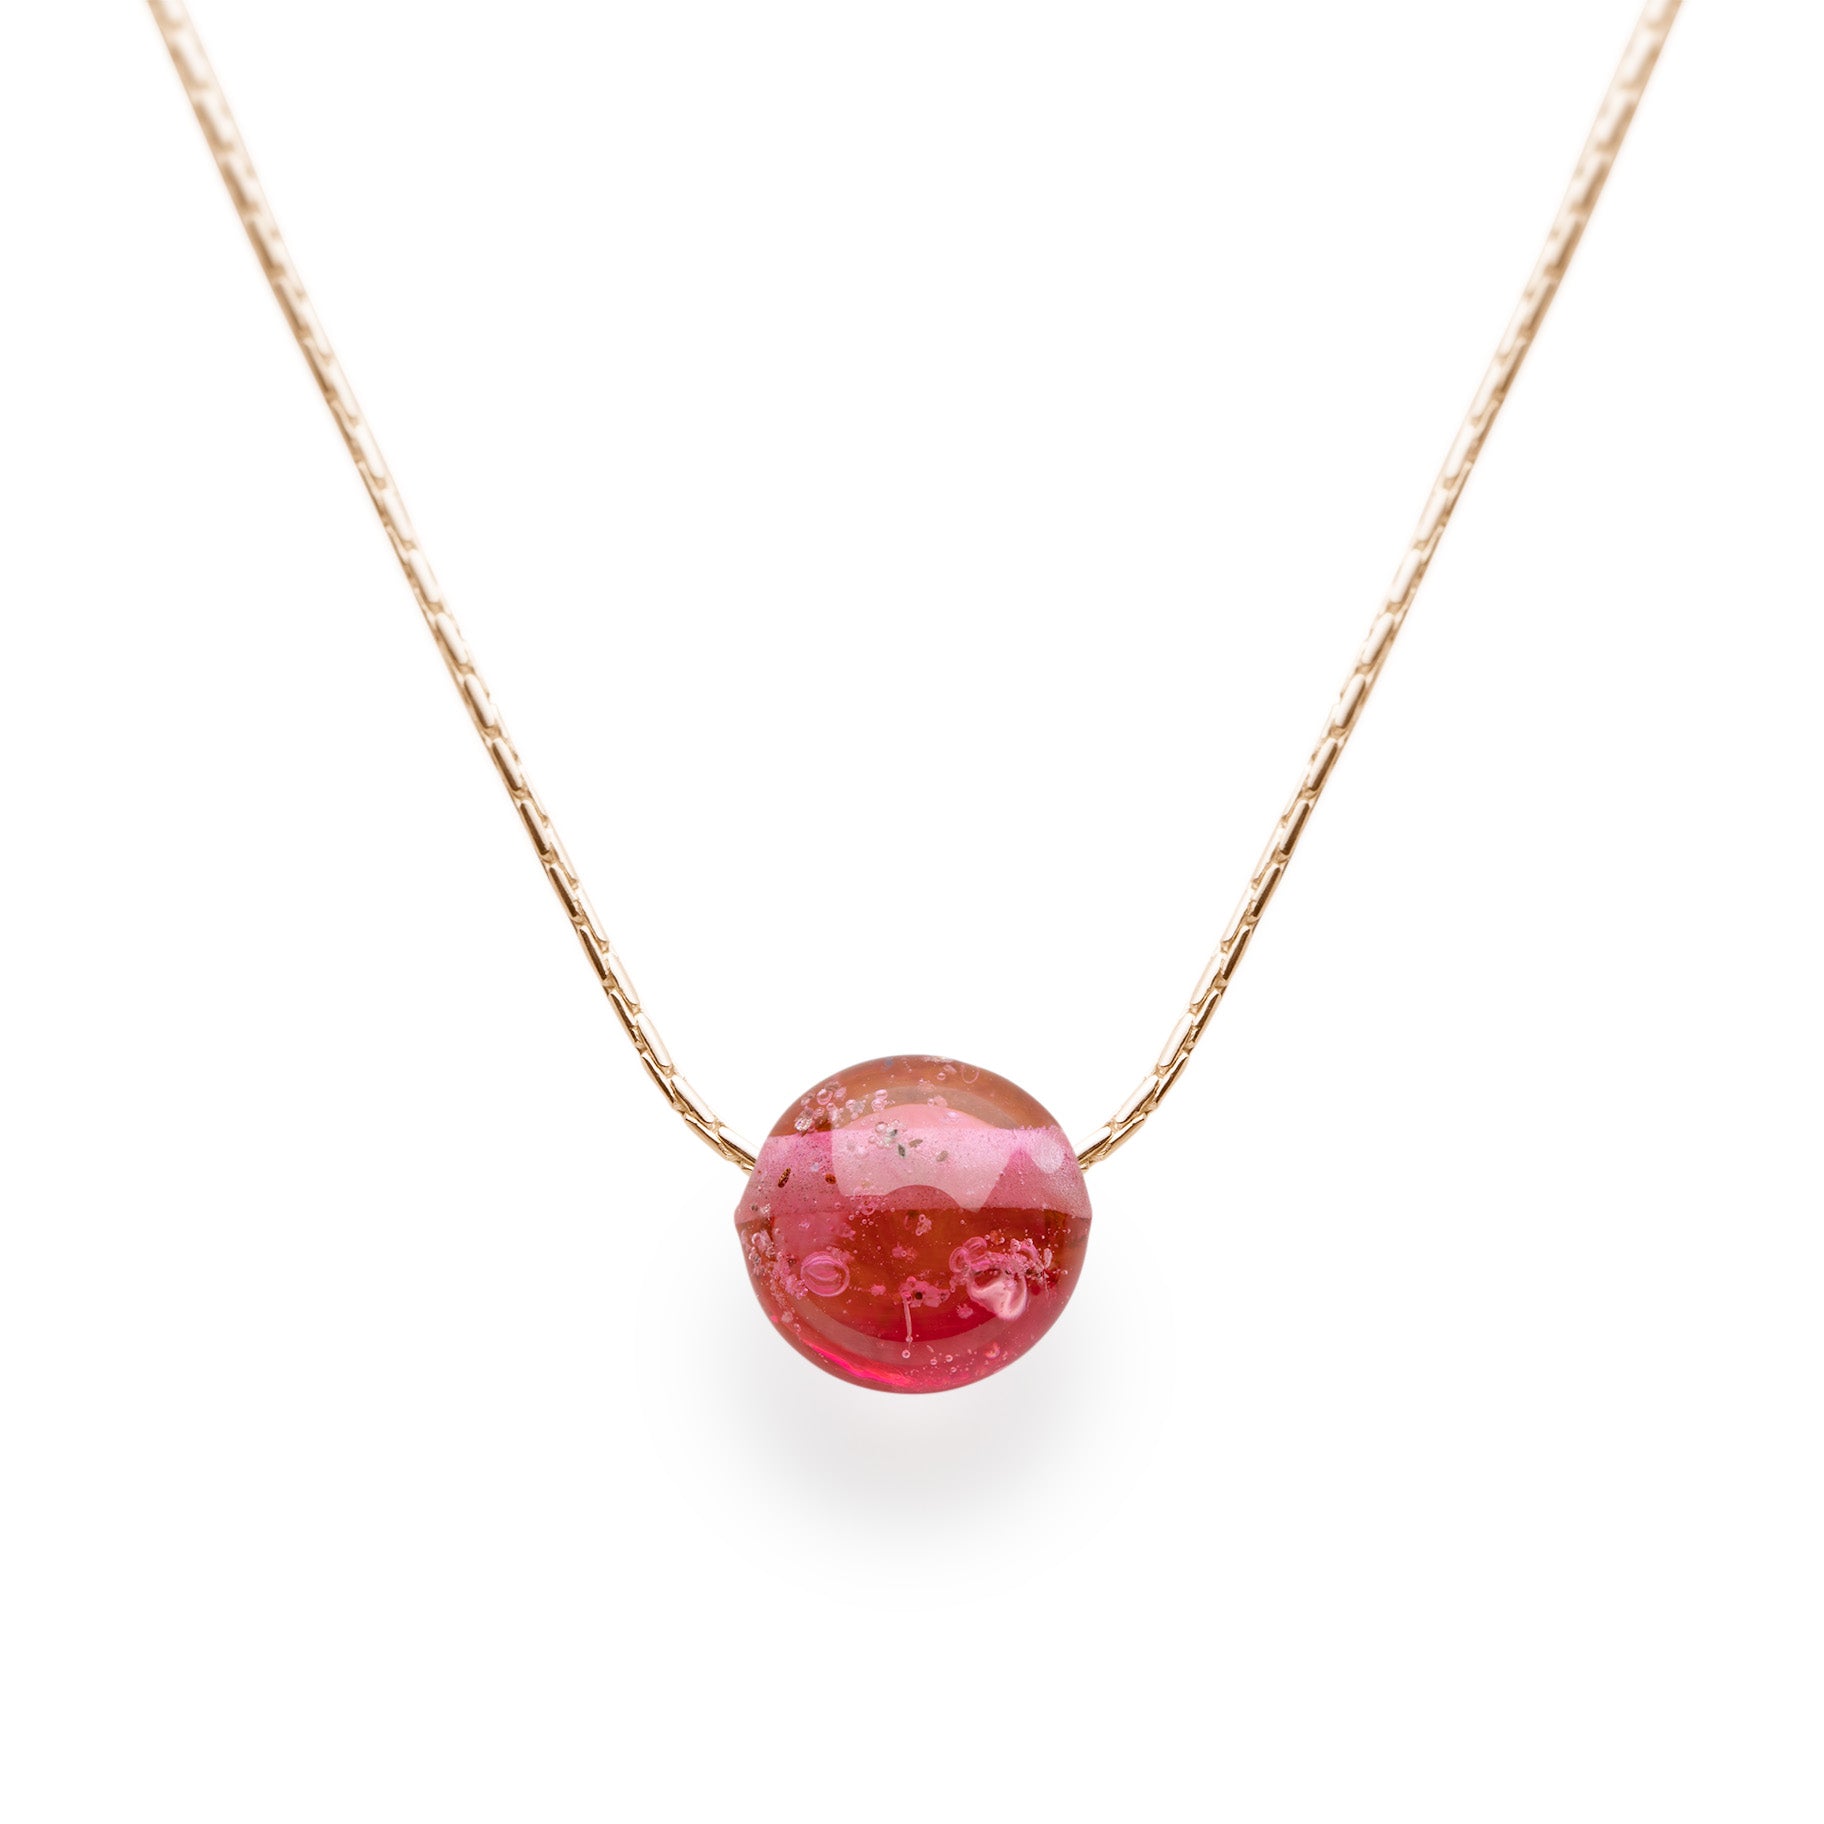 Dark pink glass sand pebble bead on gold chain necklace.